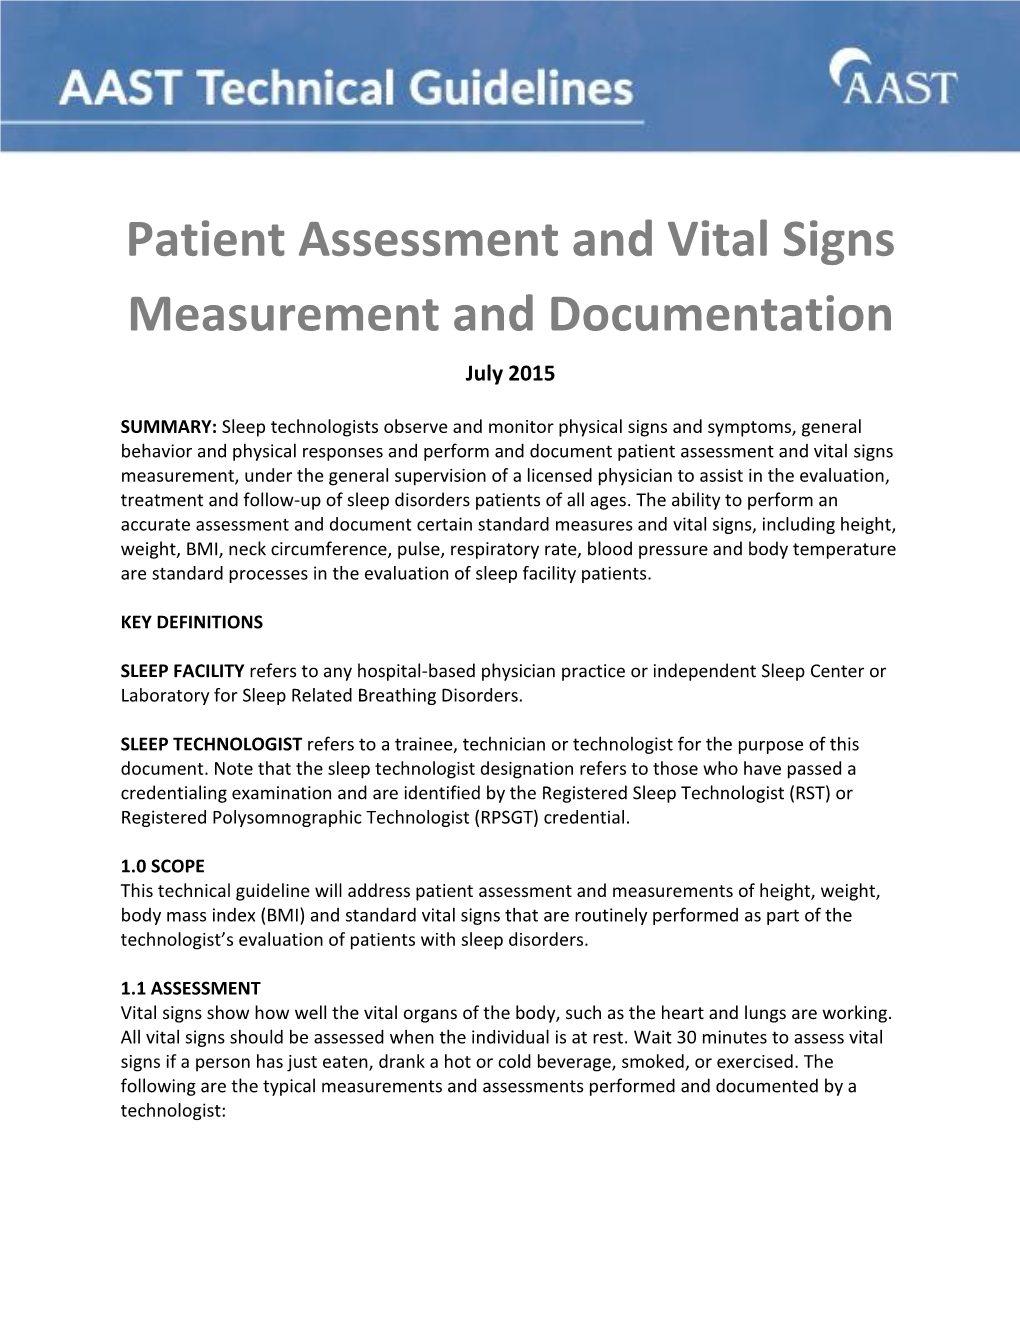 Patient Assessment and Vital Signs Measurement and Documentation July 2015